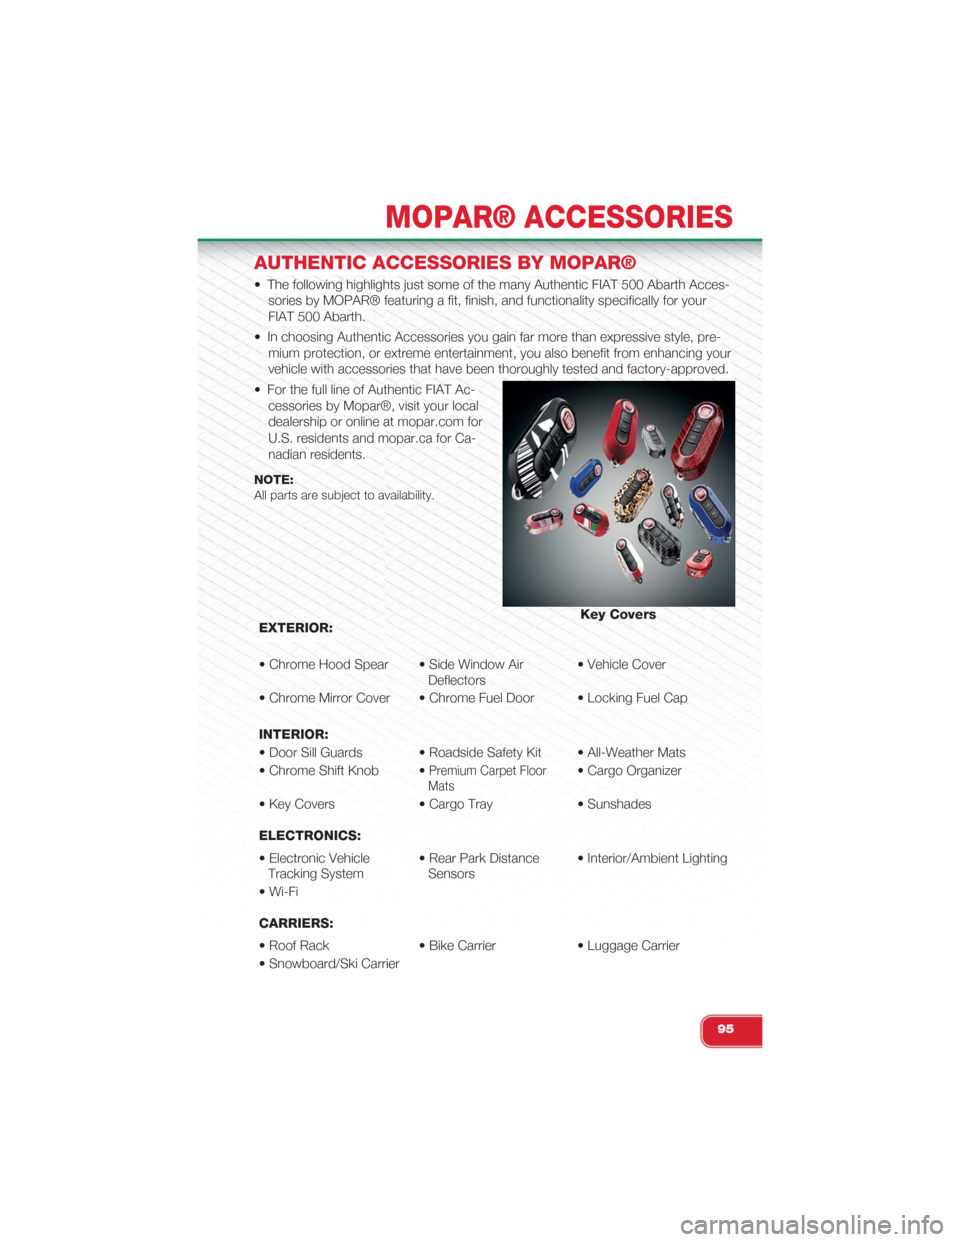 FIAT 500 ABARTH 2015 2.G User Guide AUTHENTIC ACCESSORIES BY MOPAR®
• The following highlights just some of the many Authentic FIAT 500 Abarth Acces-
sories by MOPAR® featuring a fit, finish, and functionality specifically for your
